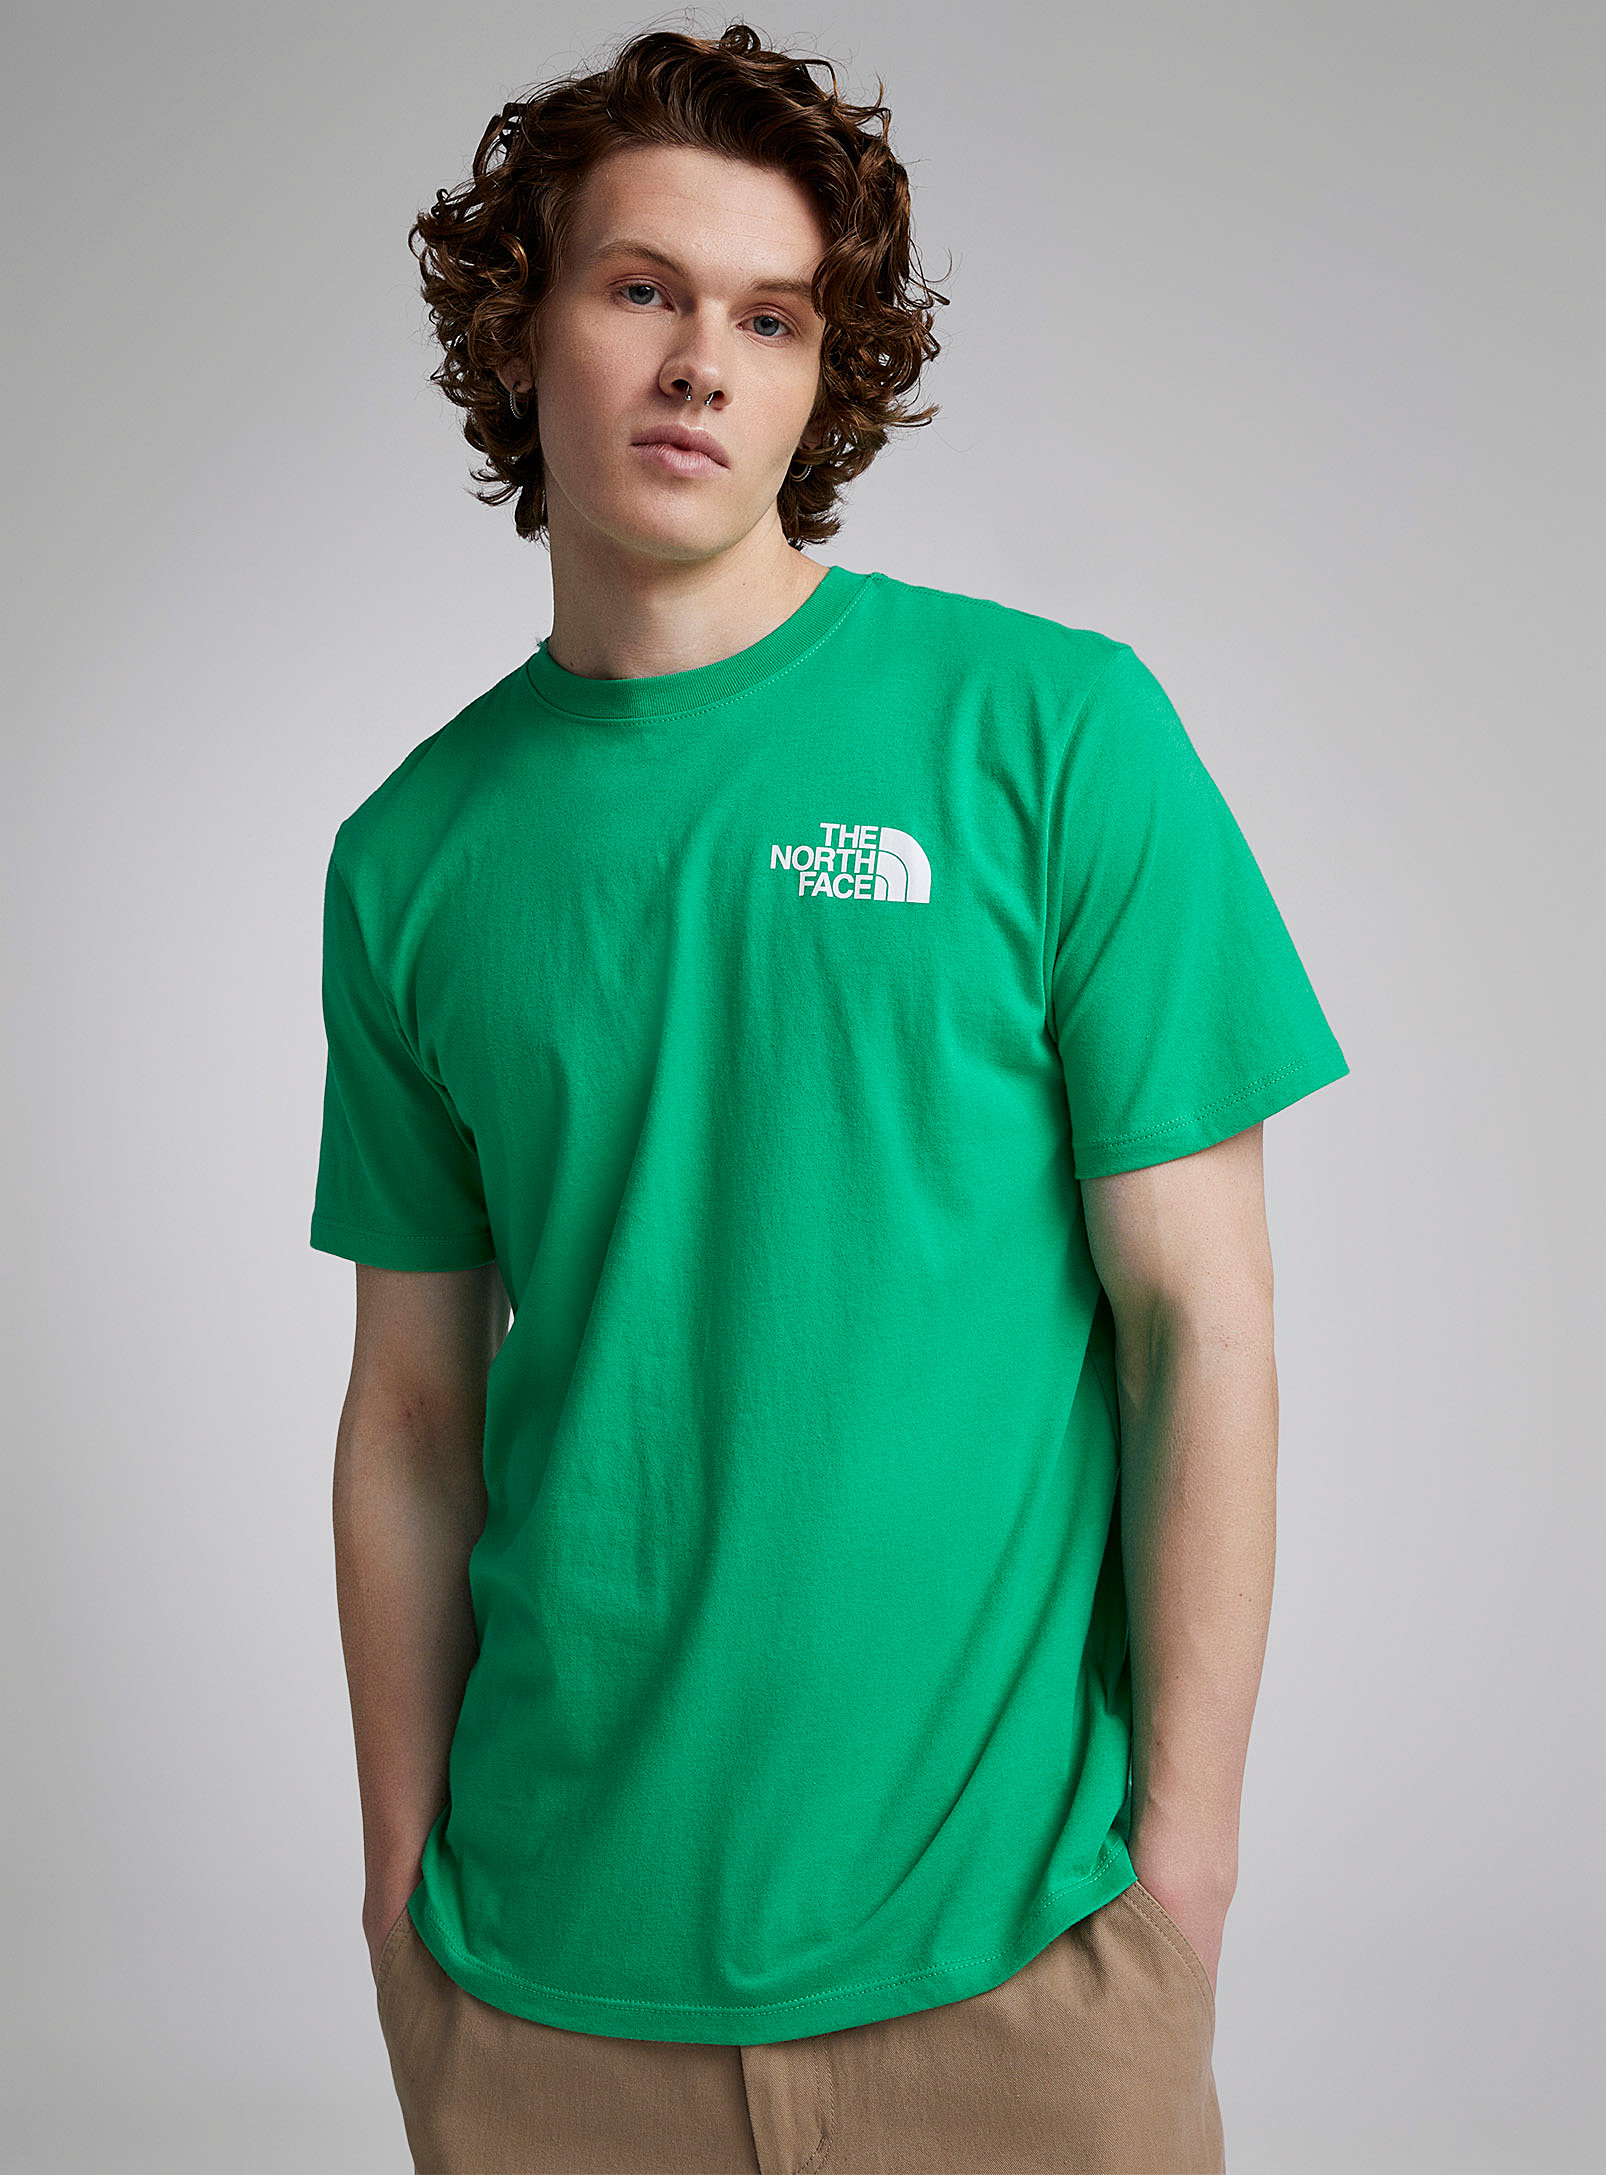 The North Face Box Logo T-shirt In Kelly Green